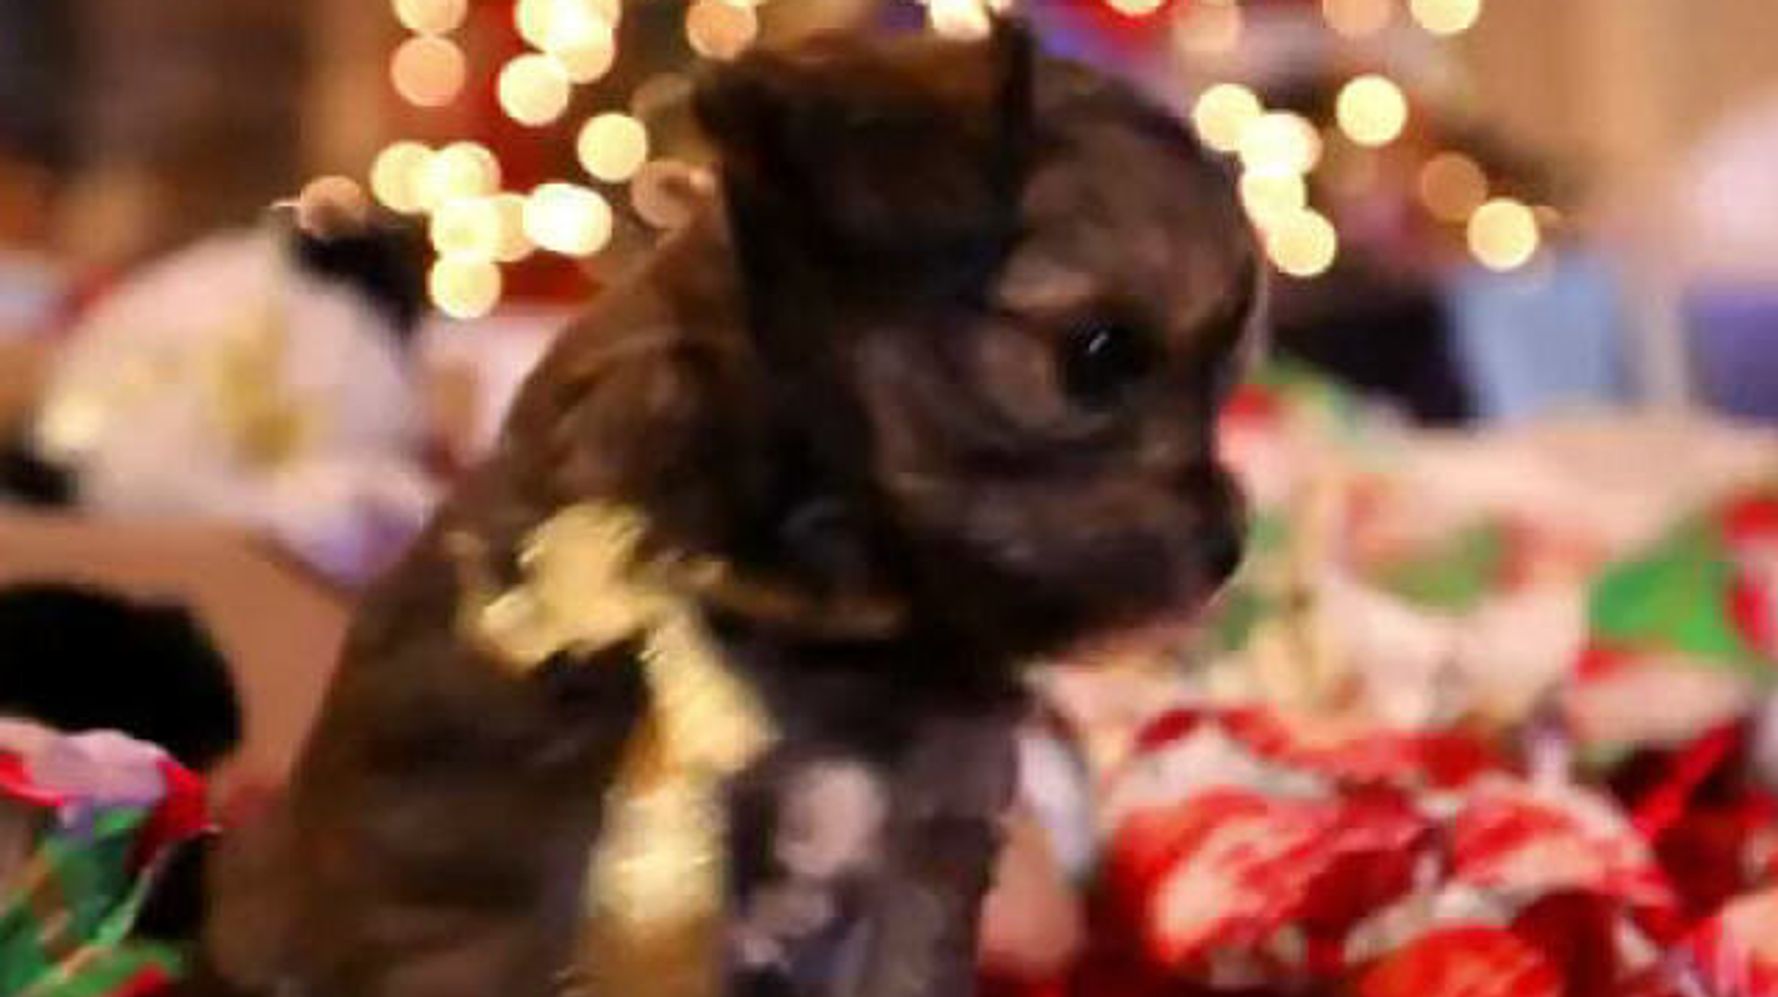 Puppy Christmas: Cute Puppies Play With Wrapping Paper | HuffPost